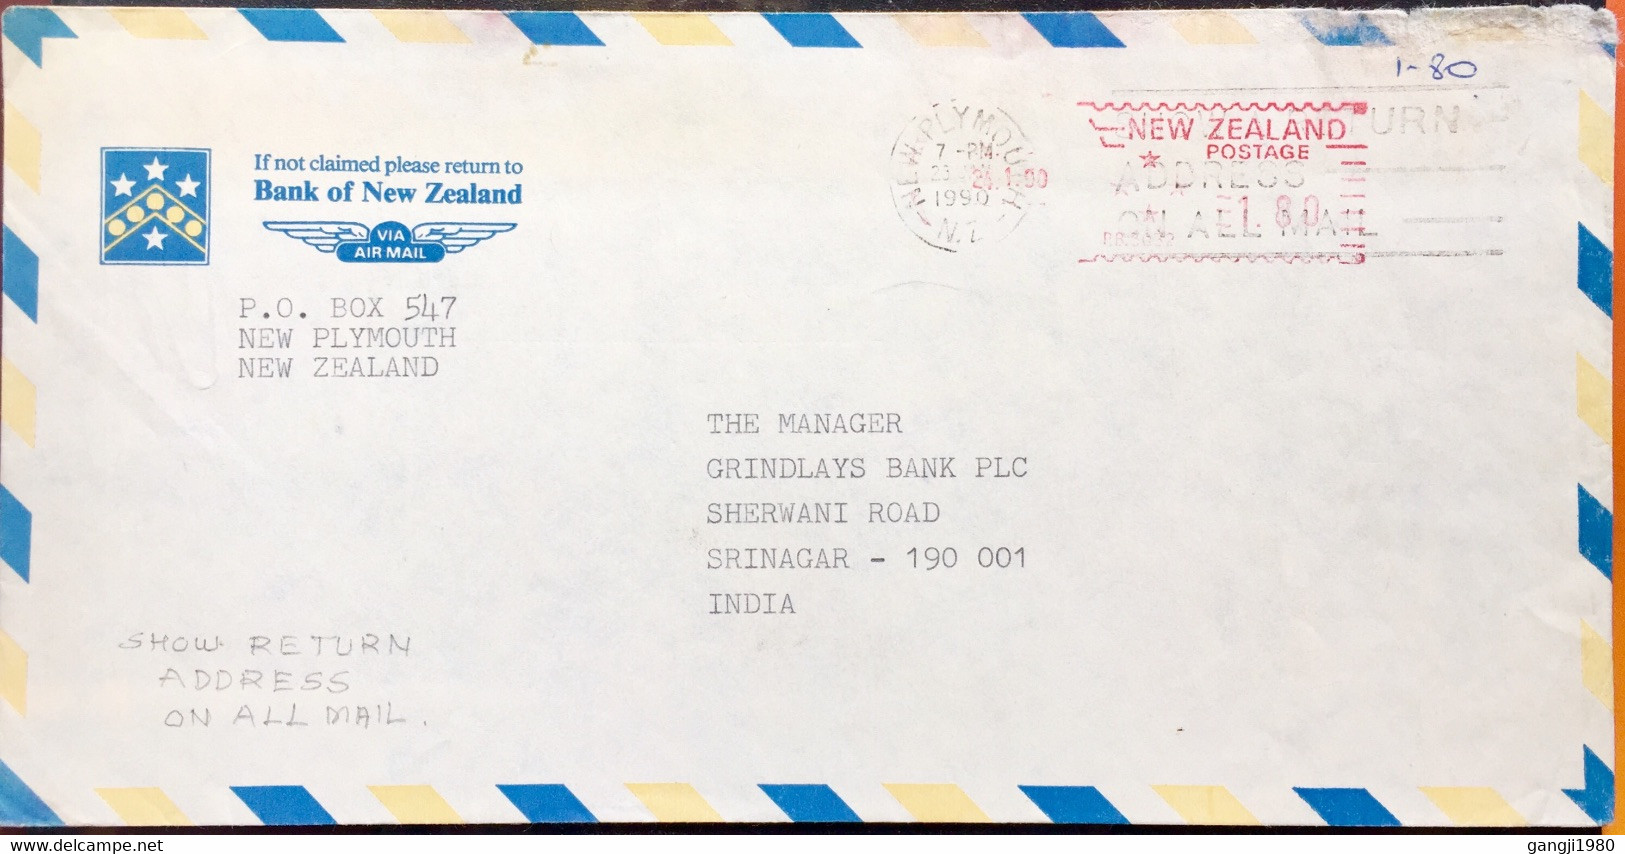 NEW ZEALAND 1990 SHOW RETURN ADDRESS ON ALL MAIL SLOGAN,NEW PLYMOUTH TO INDIA BANK OF NEW ZEALAND METER CANCELLATION - Brieven En Documenten